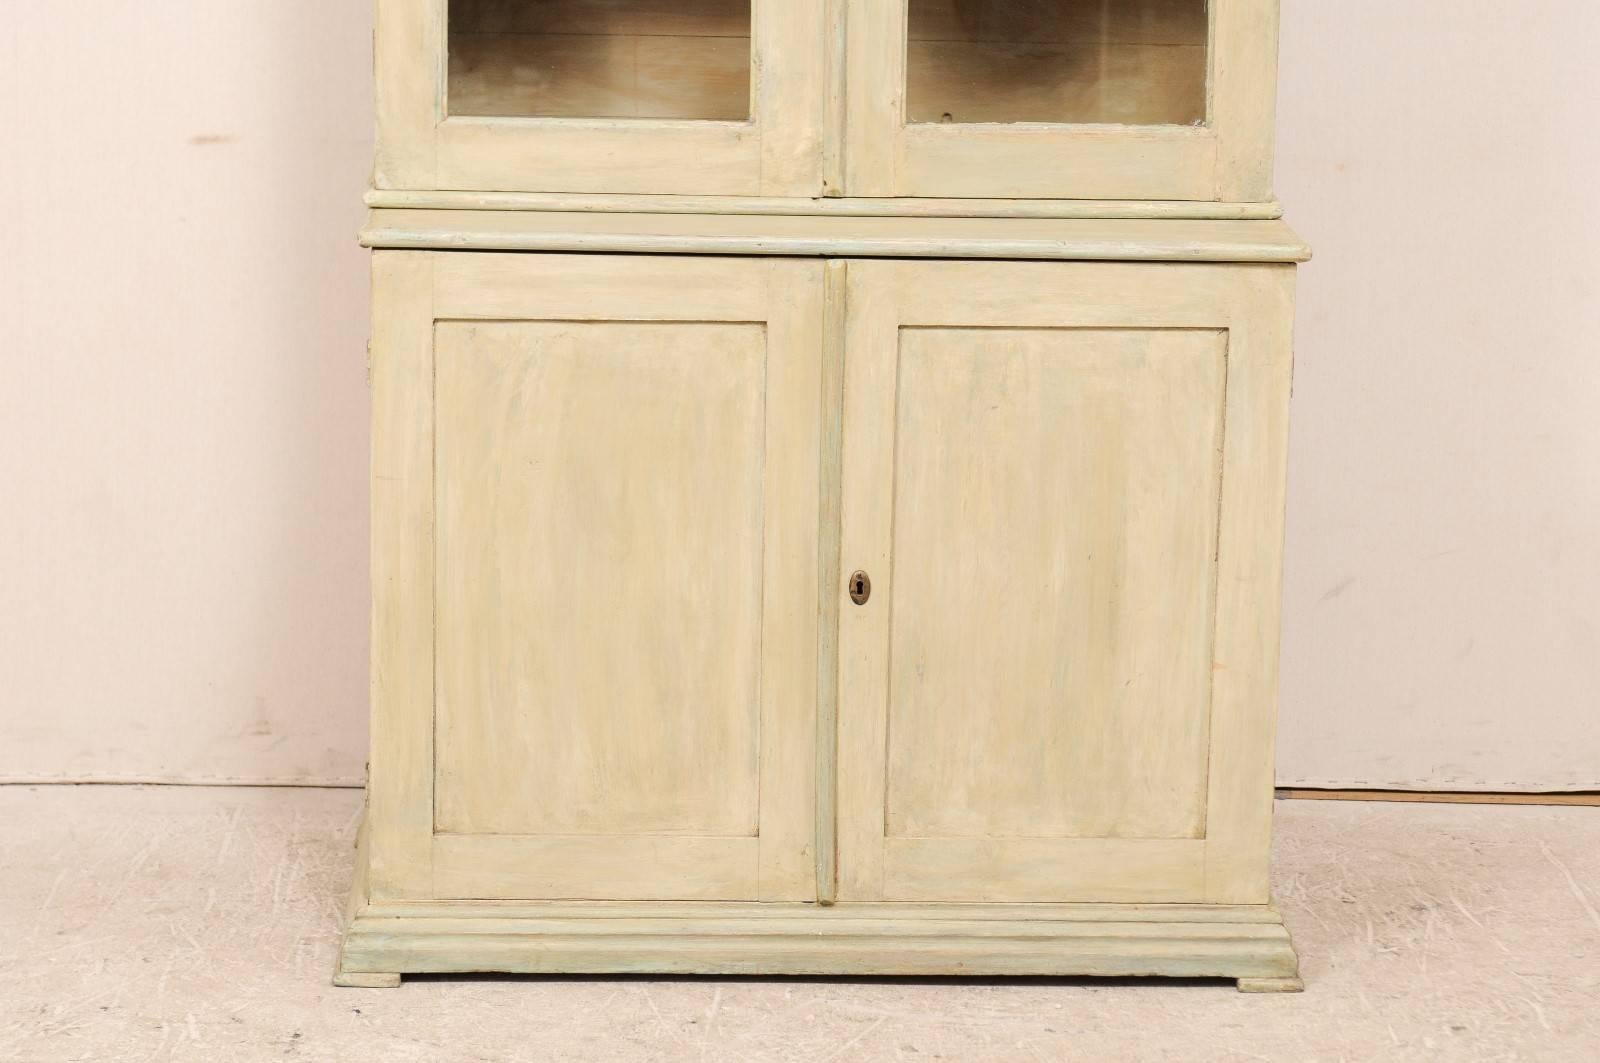 Carved 19th Century Swedish Painted Wood Bookcase with Glass Doors and Extra Storage